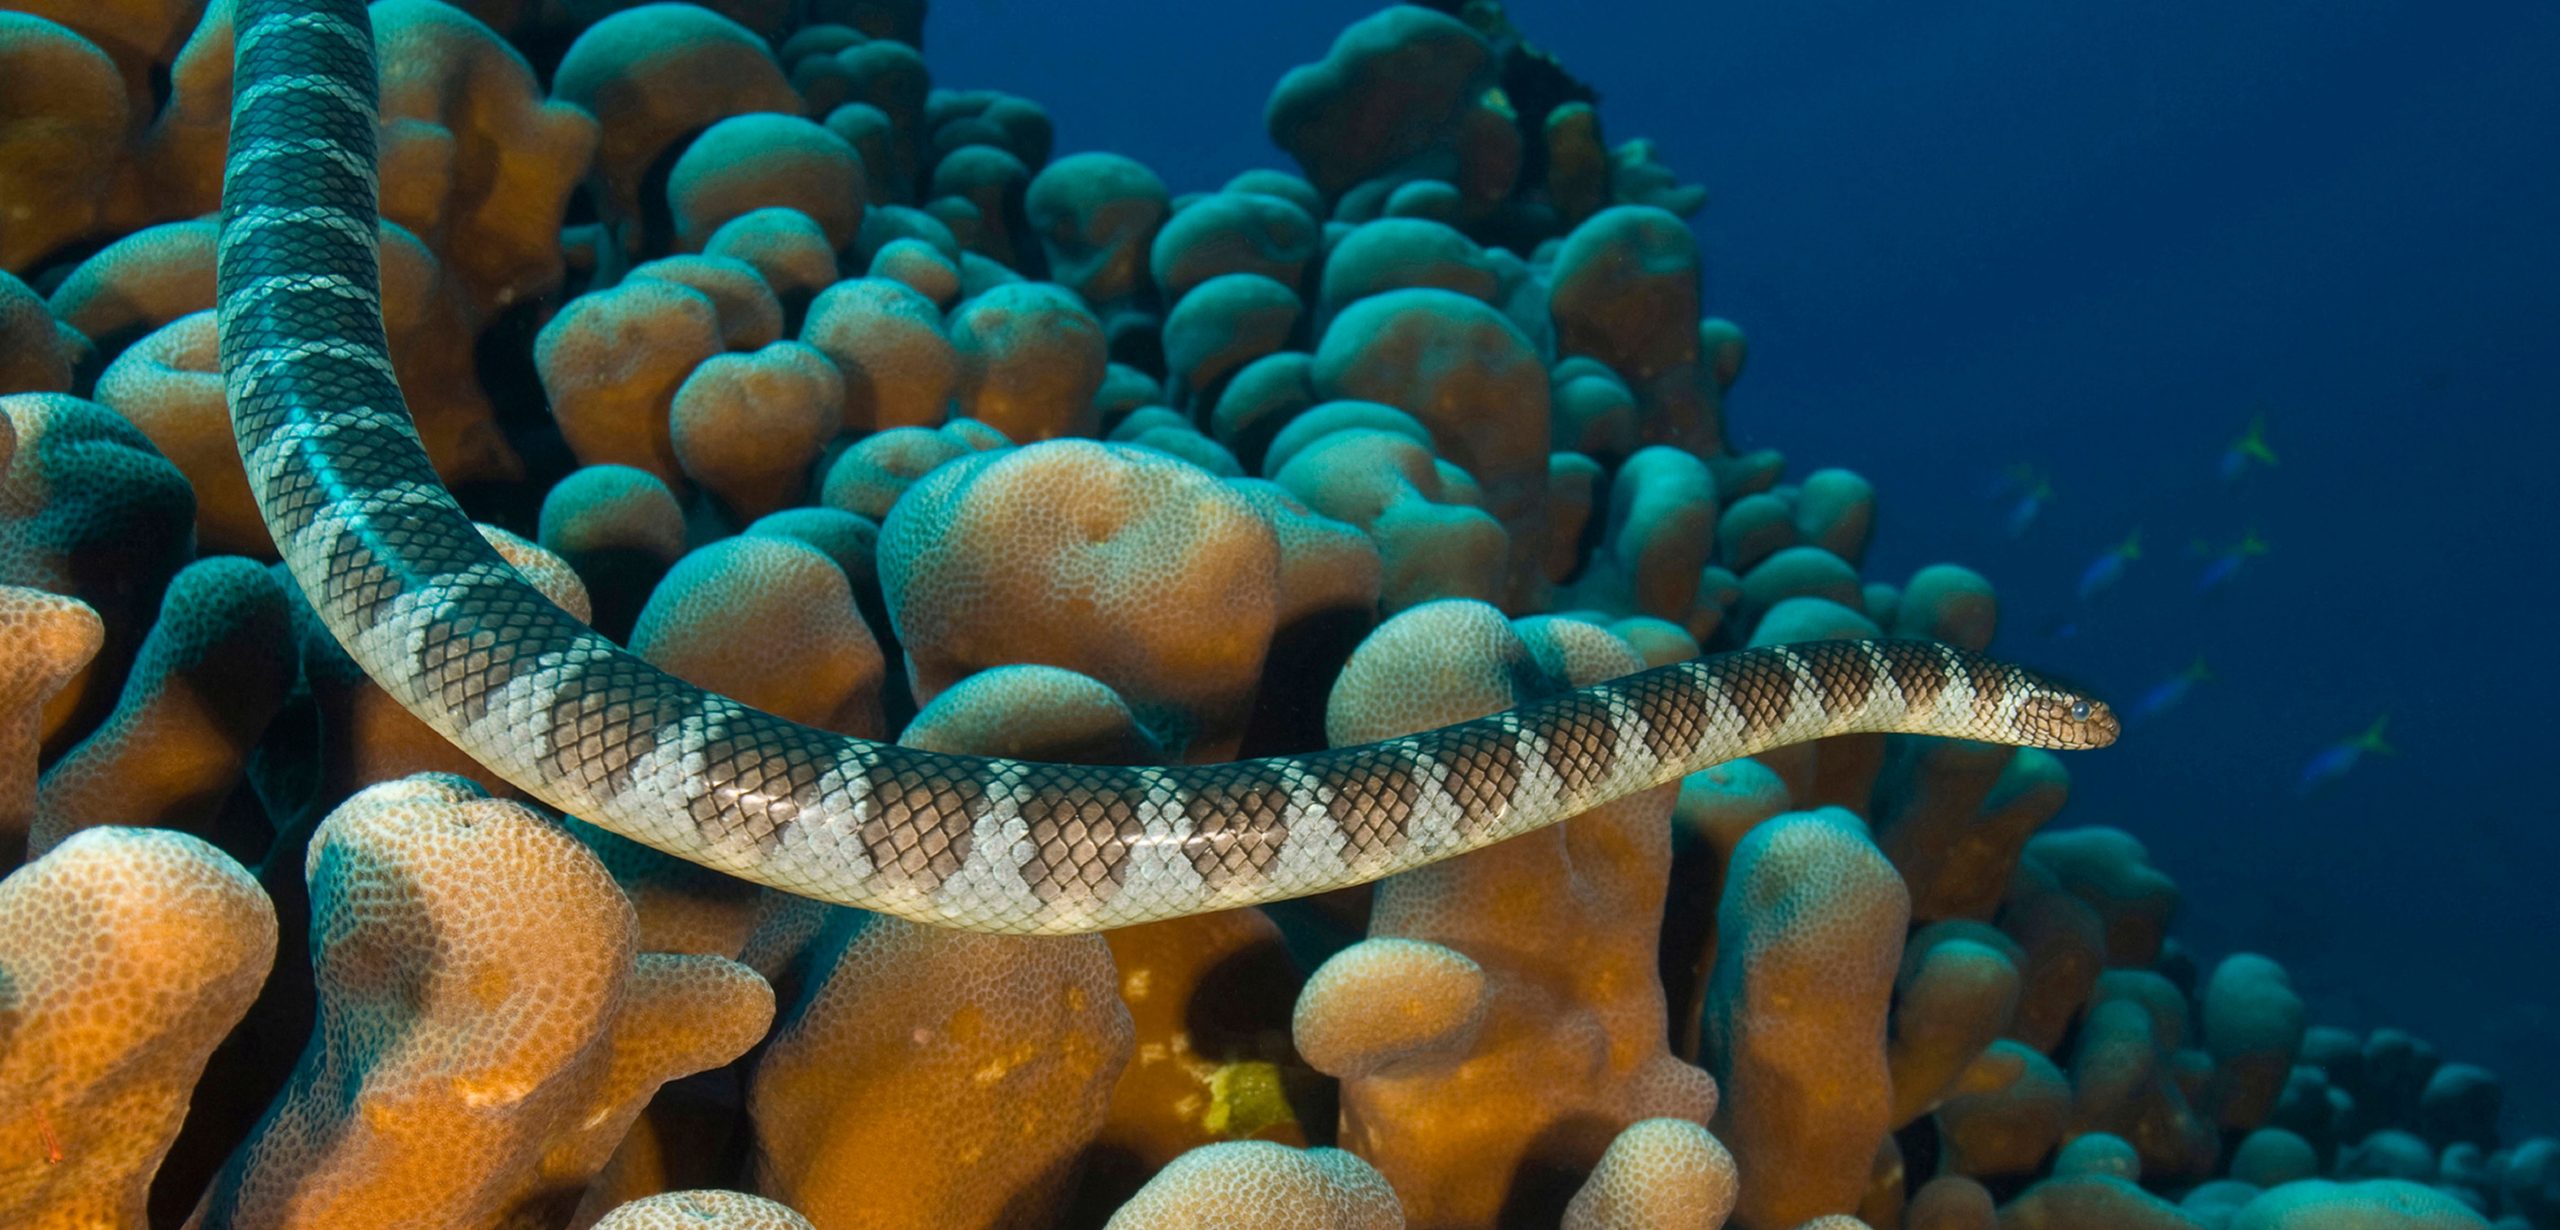 Sea snakes. Why’d it have to be sea snakes? Photo by WaterFrame/Alamy Stock Photo